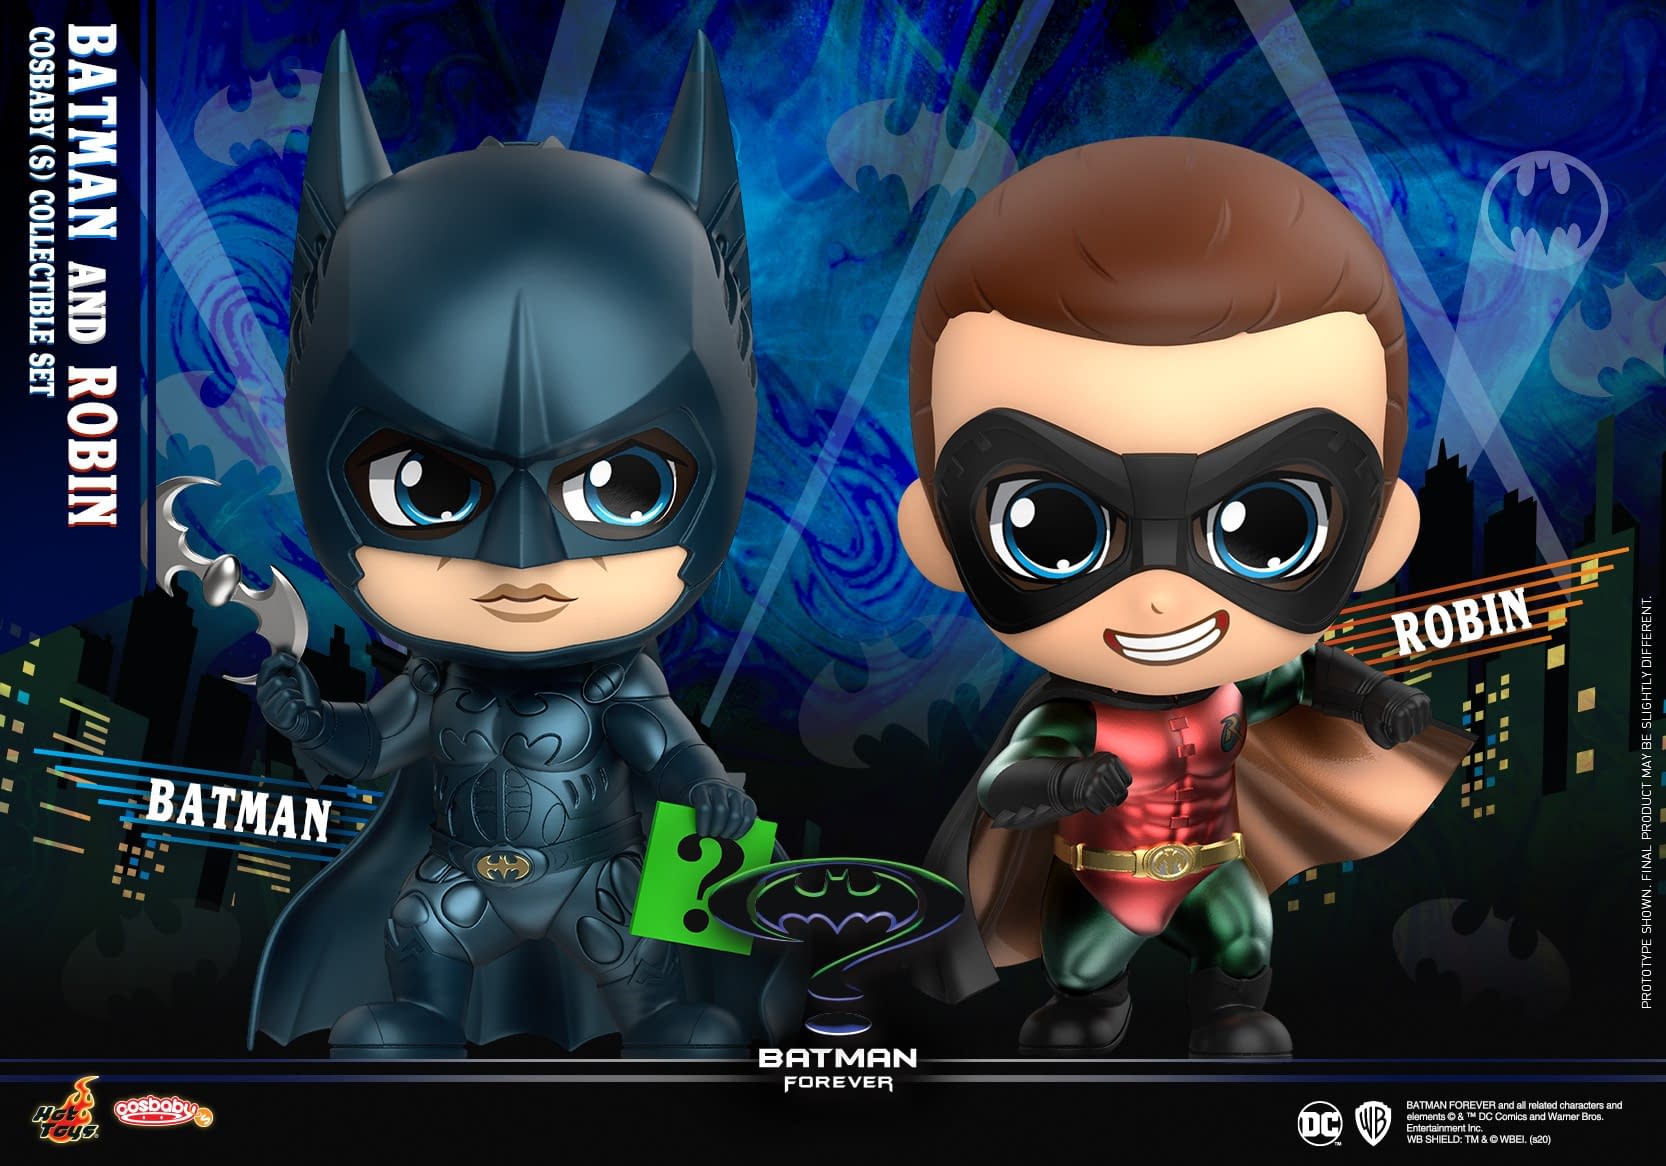 "Batman Forever" Cosbaby Figures Arrive with Hot Toys